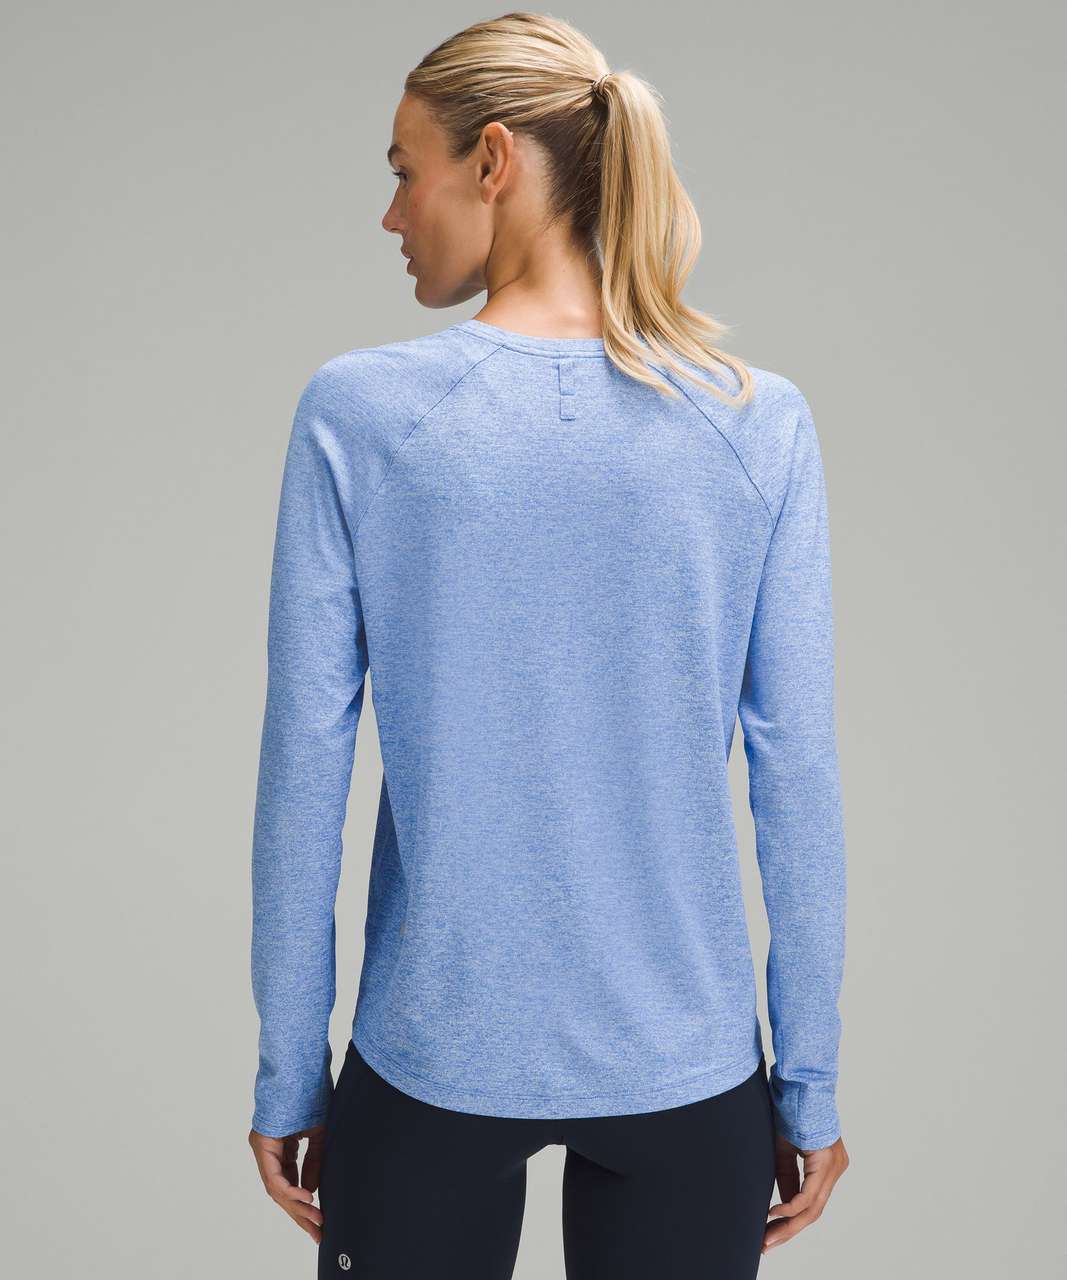 Lululemon License to Train Classic-Fit Long-Sleeve Shirt - Heathered Pipe Dream Blue